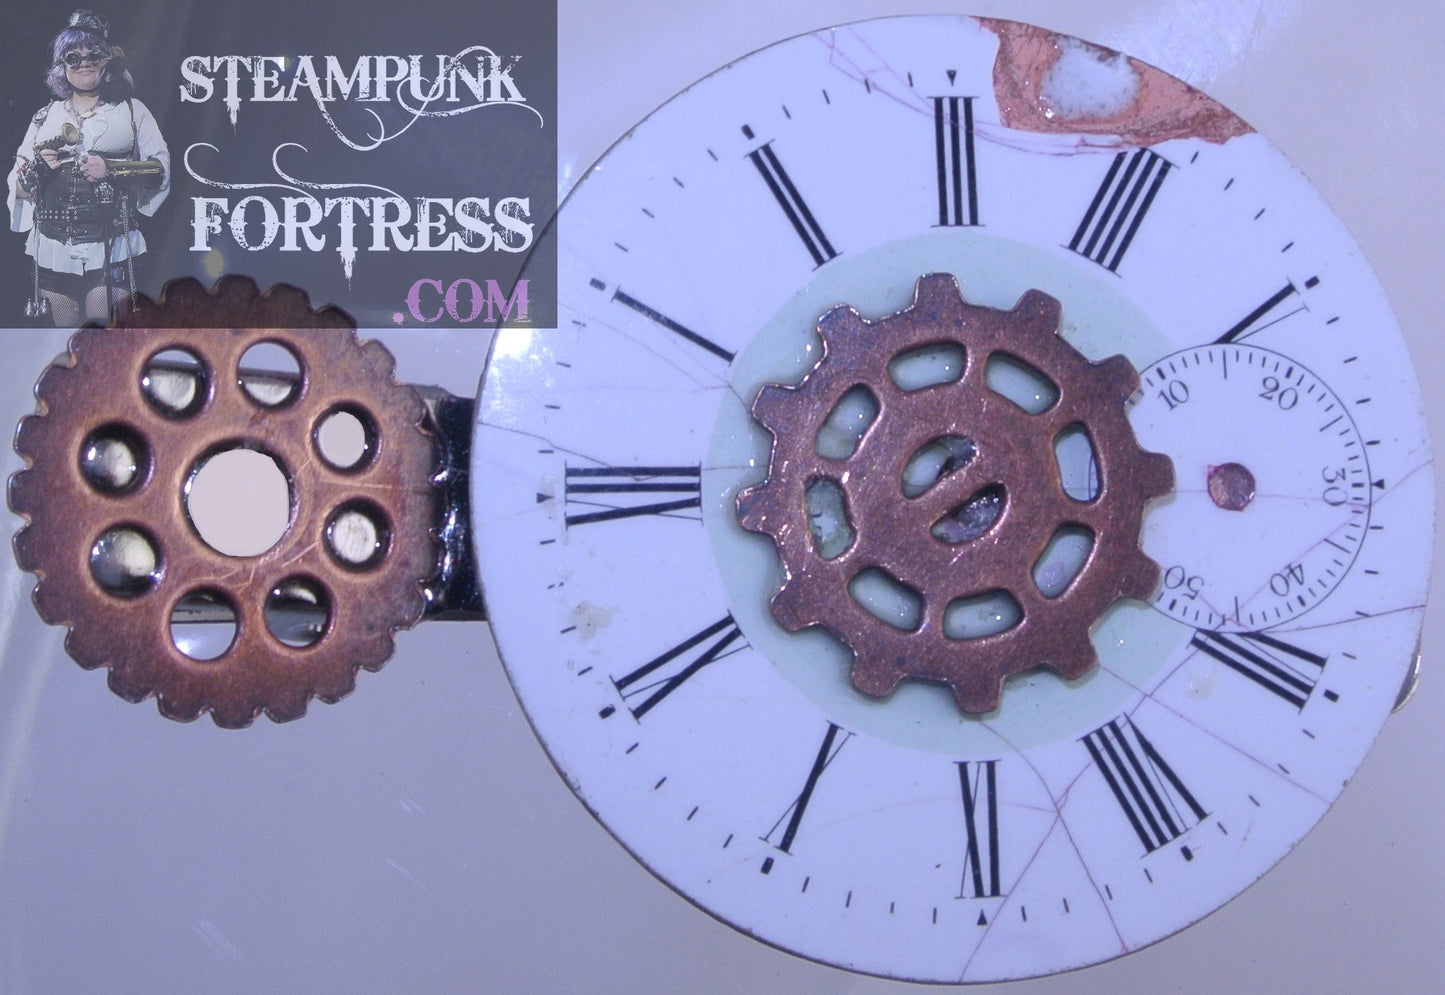 BARRETTE SILVER CLOCK FACE WATCH DIAL PORCELAIN 2 COPPER GEARS AUTHENTIC GENUINE PARTS HAIR CLIP STARR WILDE STEAMPUNK FORTRESS